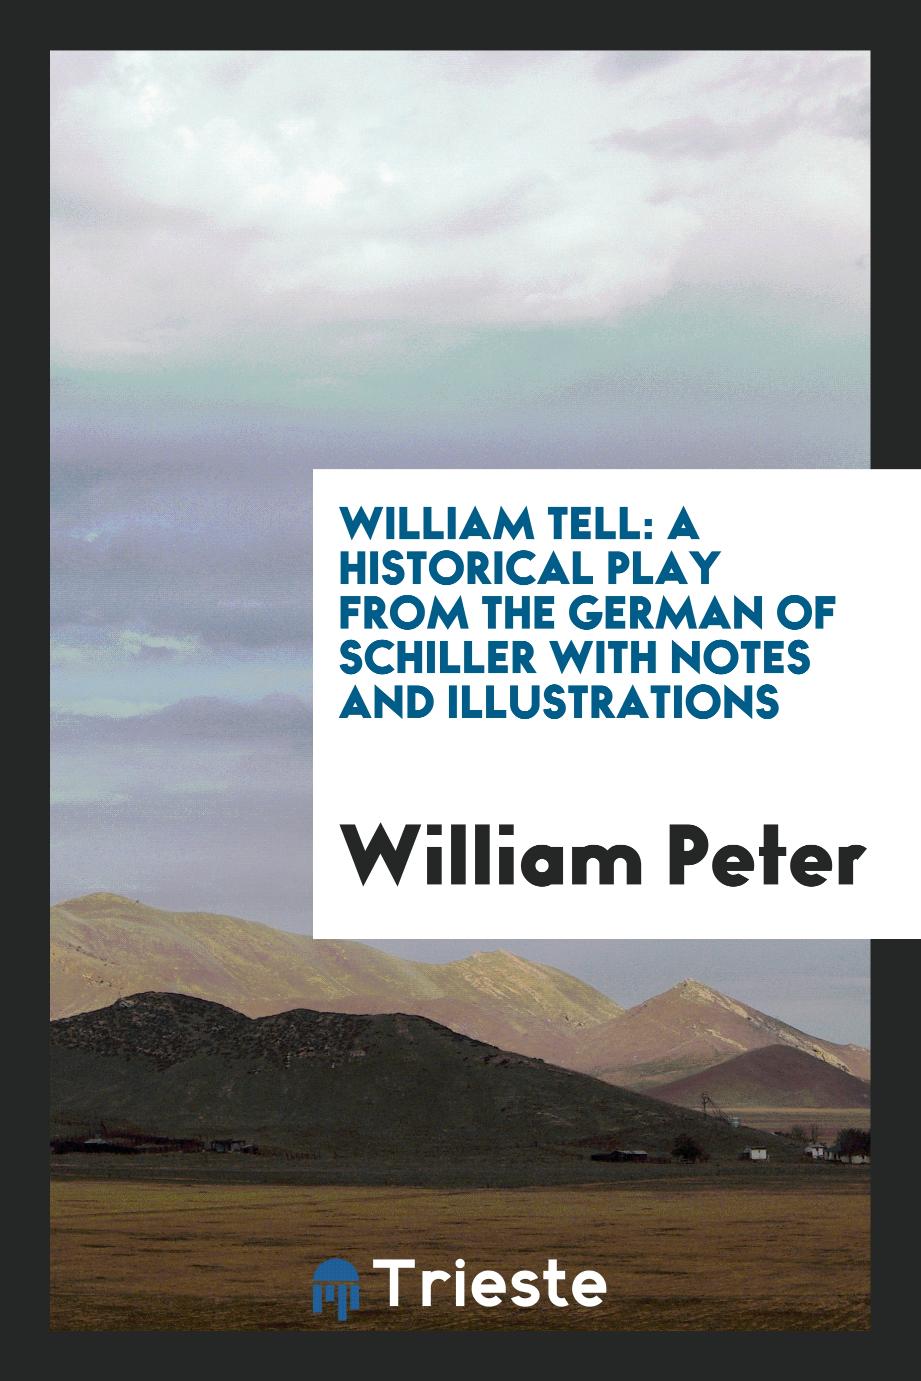 William Tell: A Historical Play from the German of Schiller with Notes and Illustrations